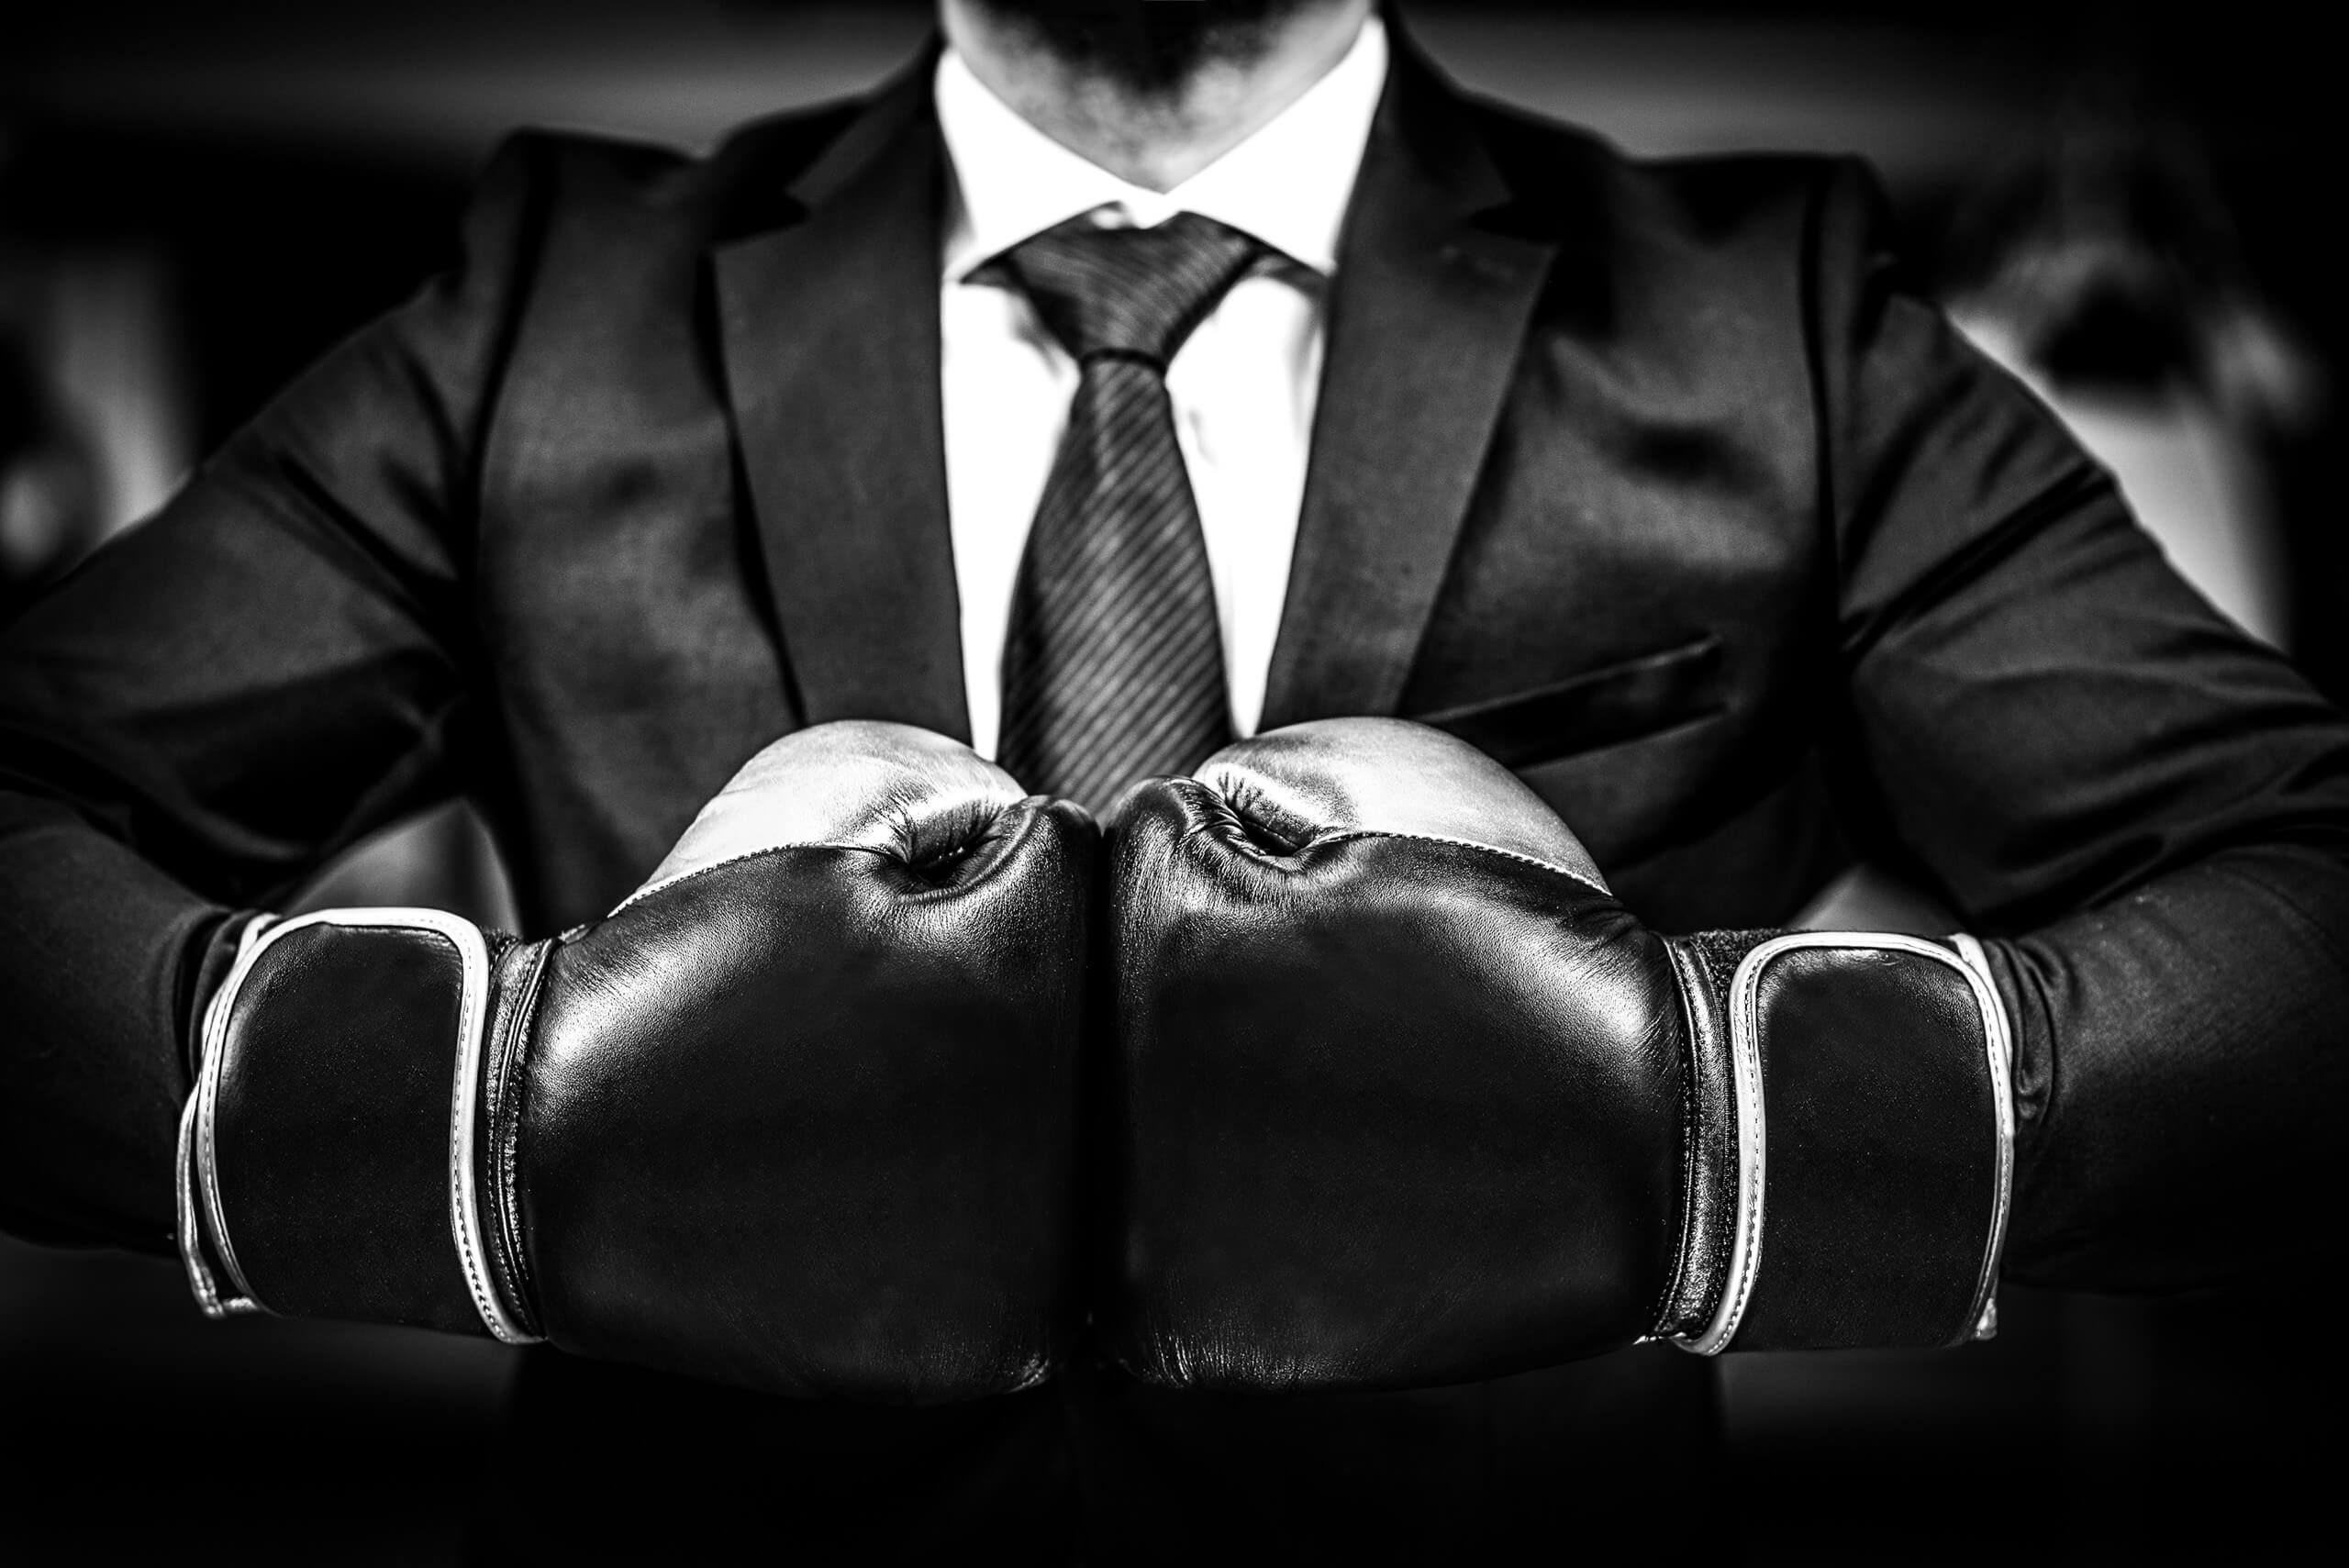 A person wearing a business suit and boxing gloves